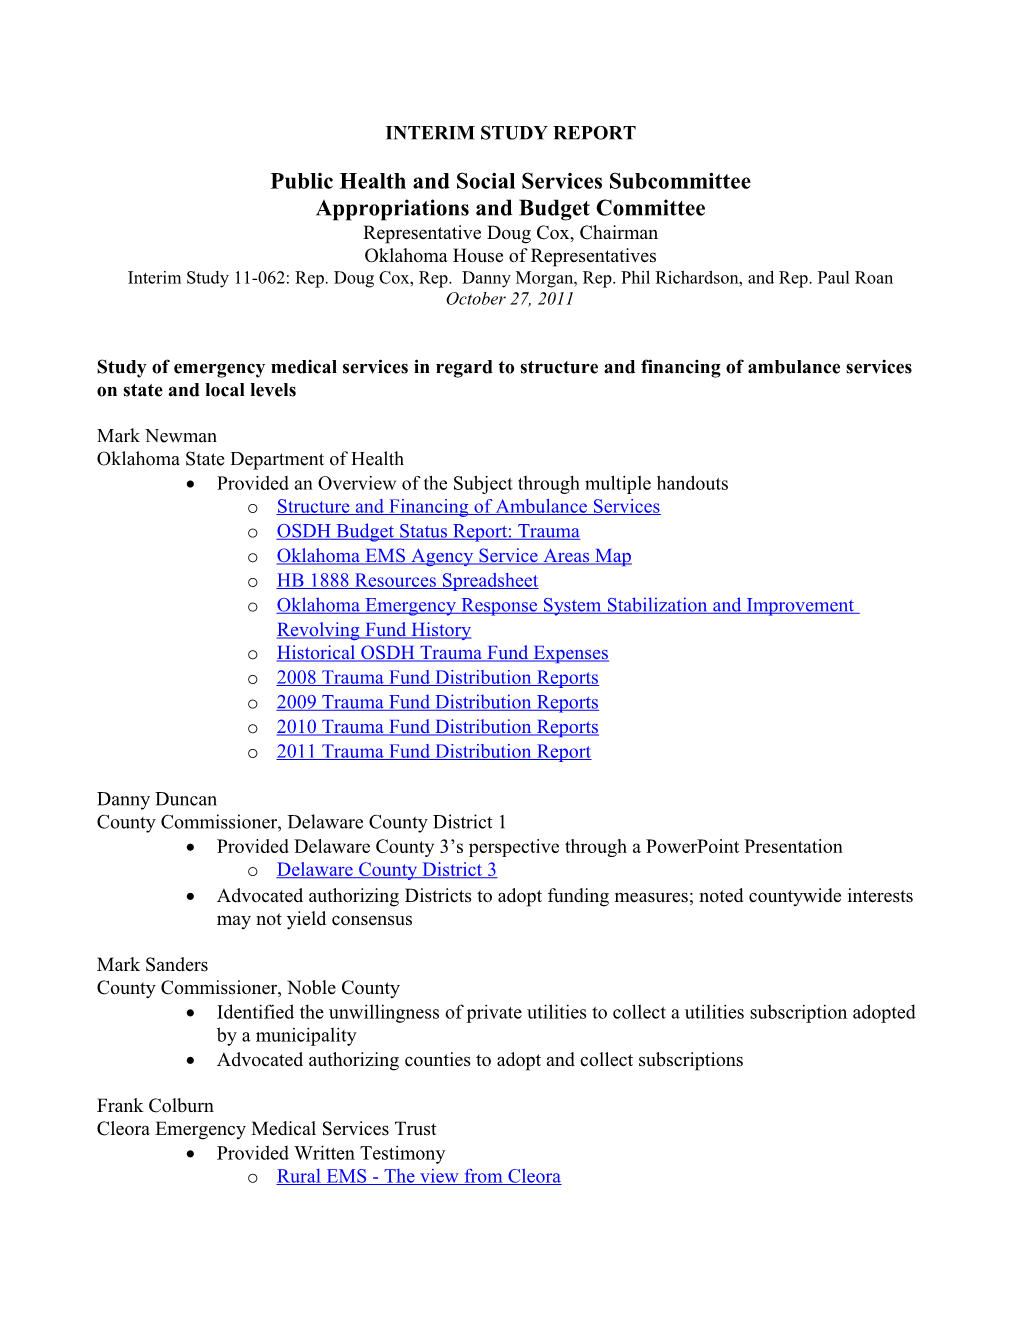 Public Health and Social Services Subcommittee